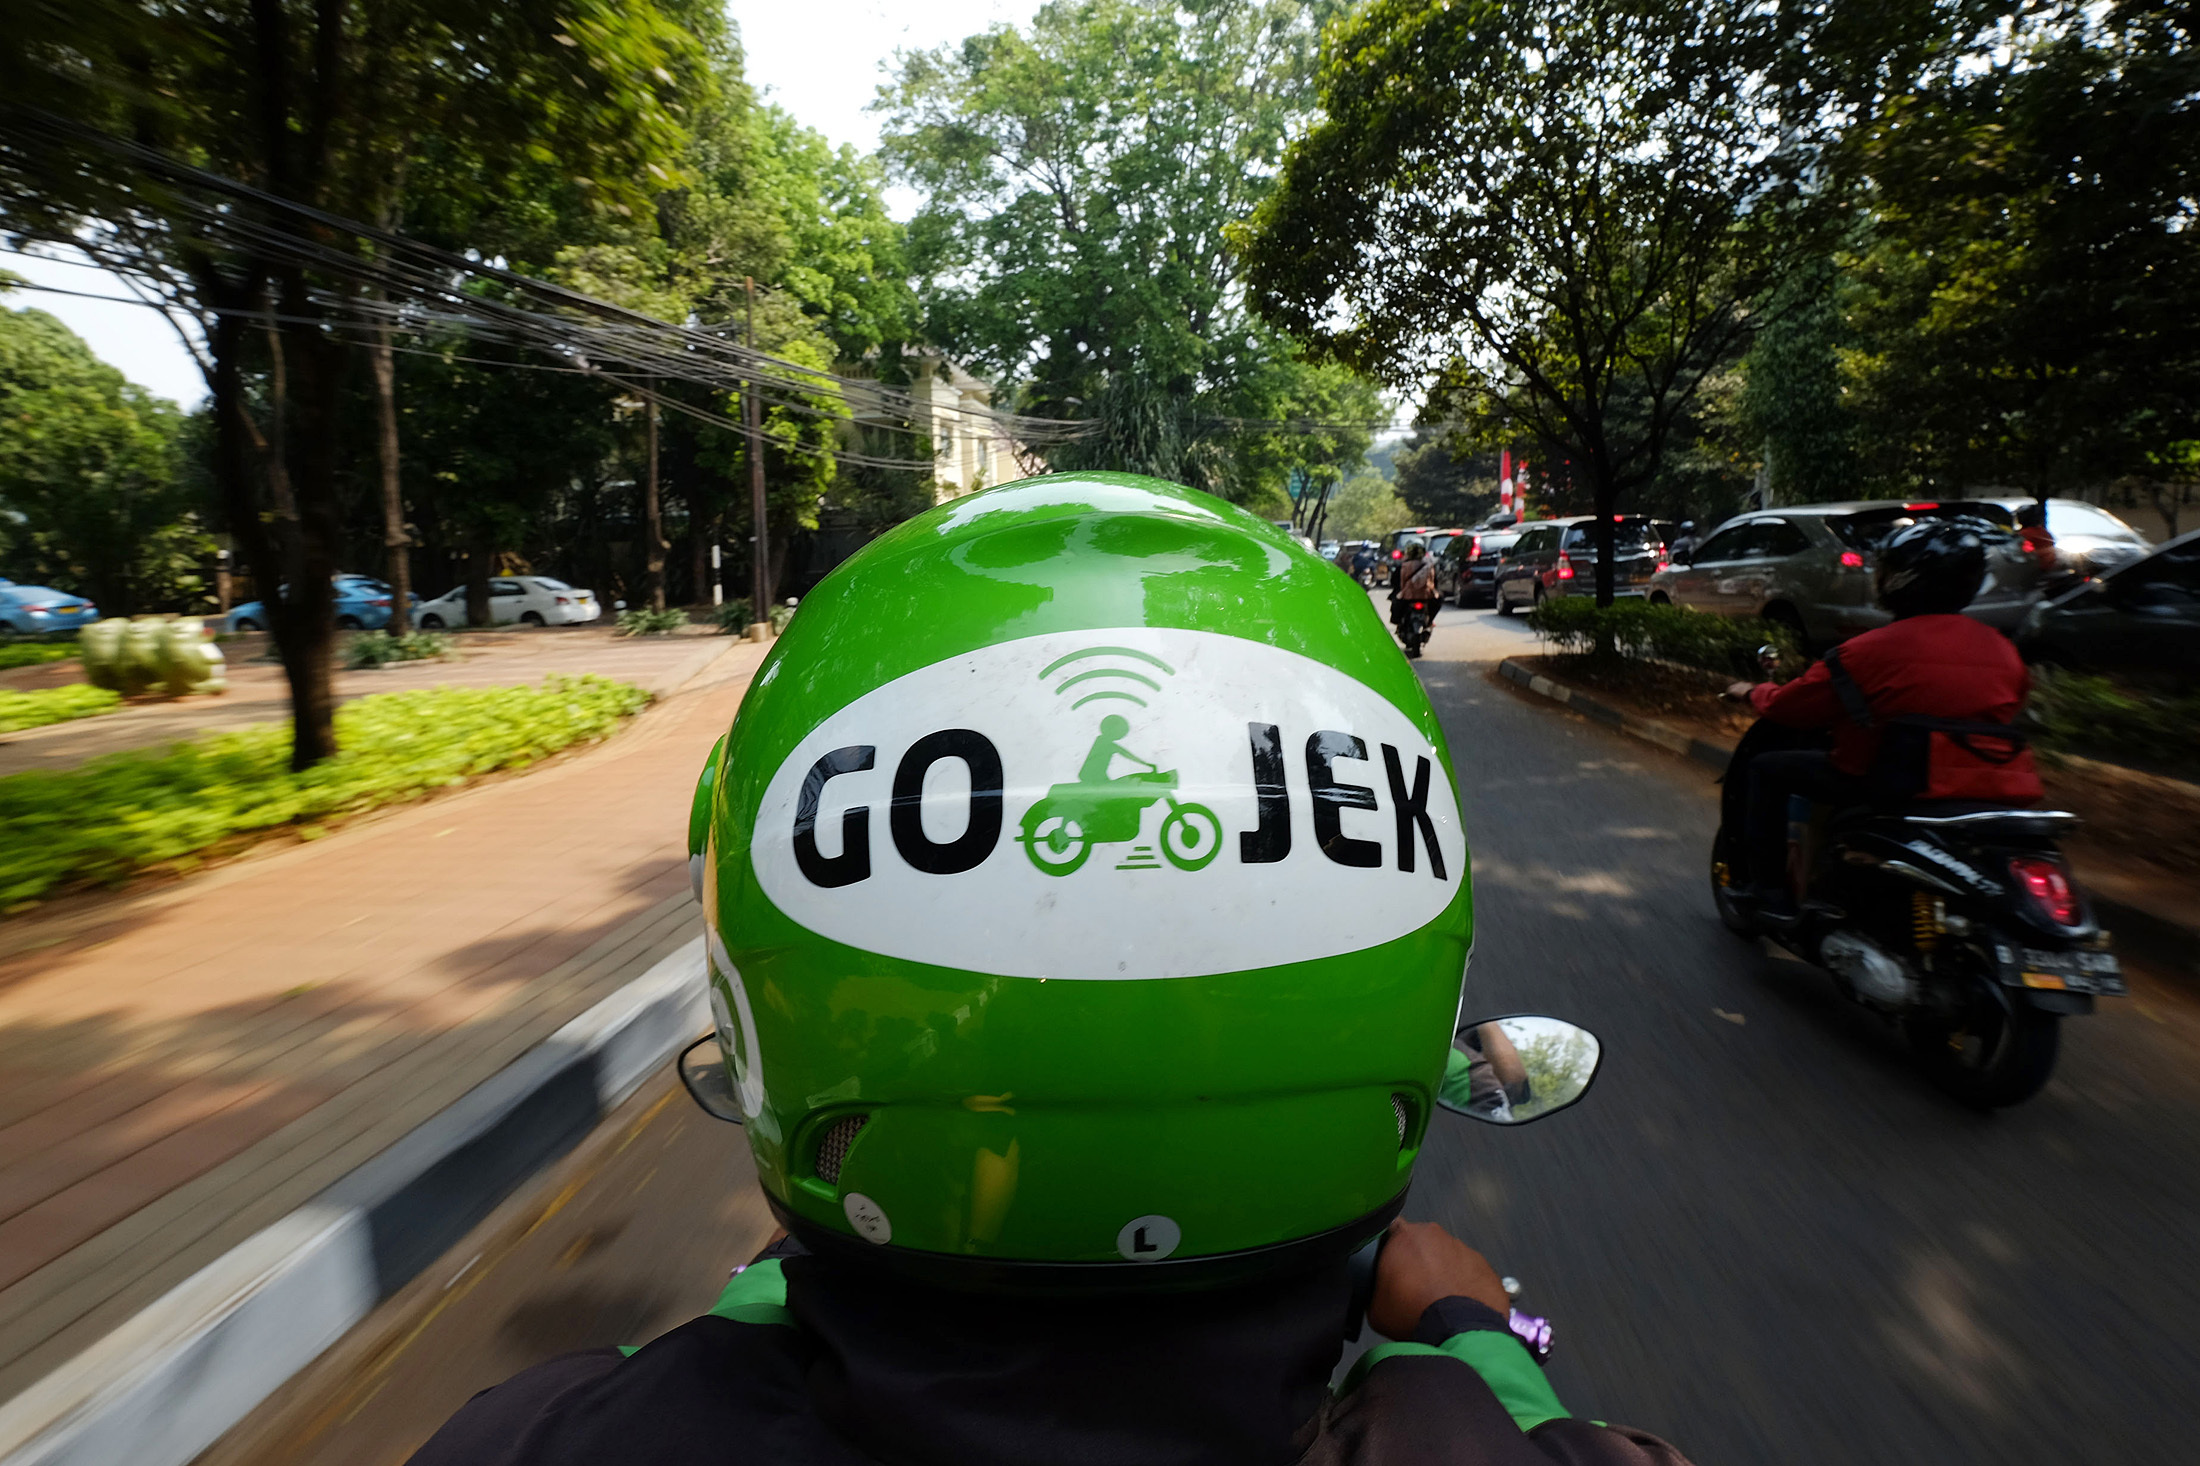 https://www.bloomberg.com/news/articles/2017-01-10/indonesia-s-first-billion-dollar-startup-races-to-kill-cash